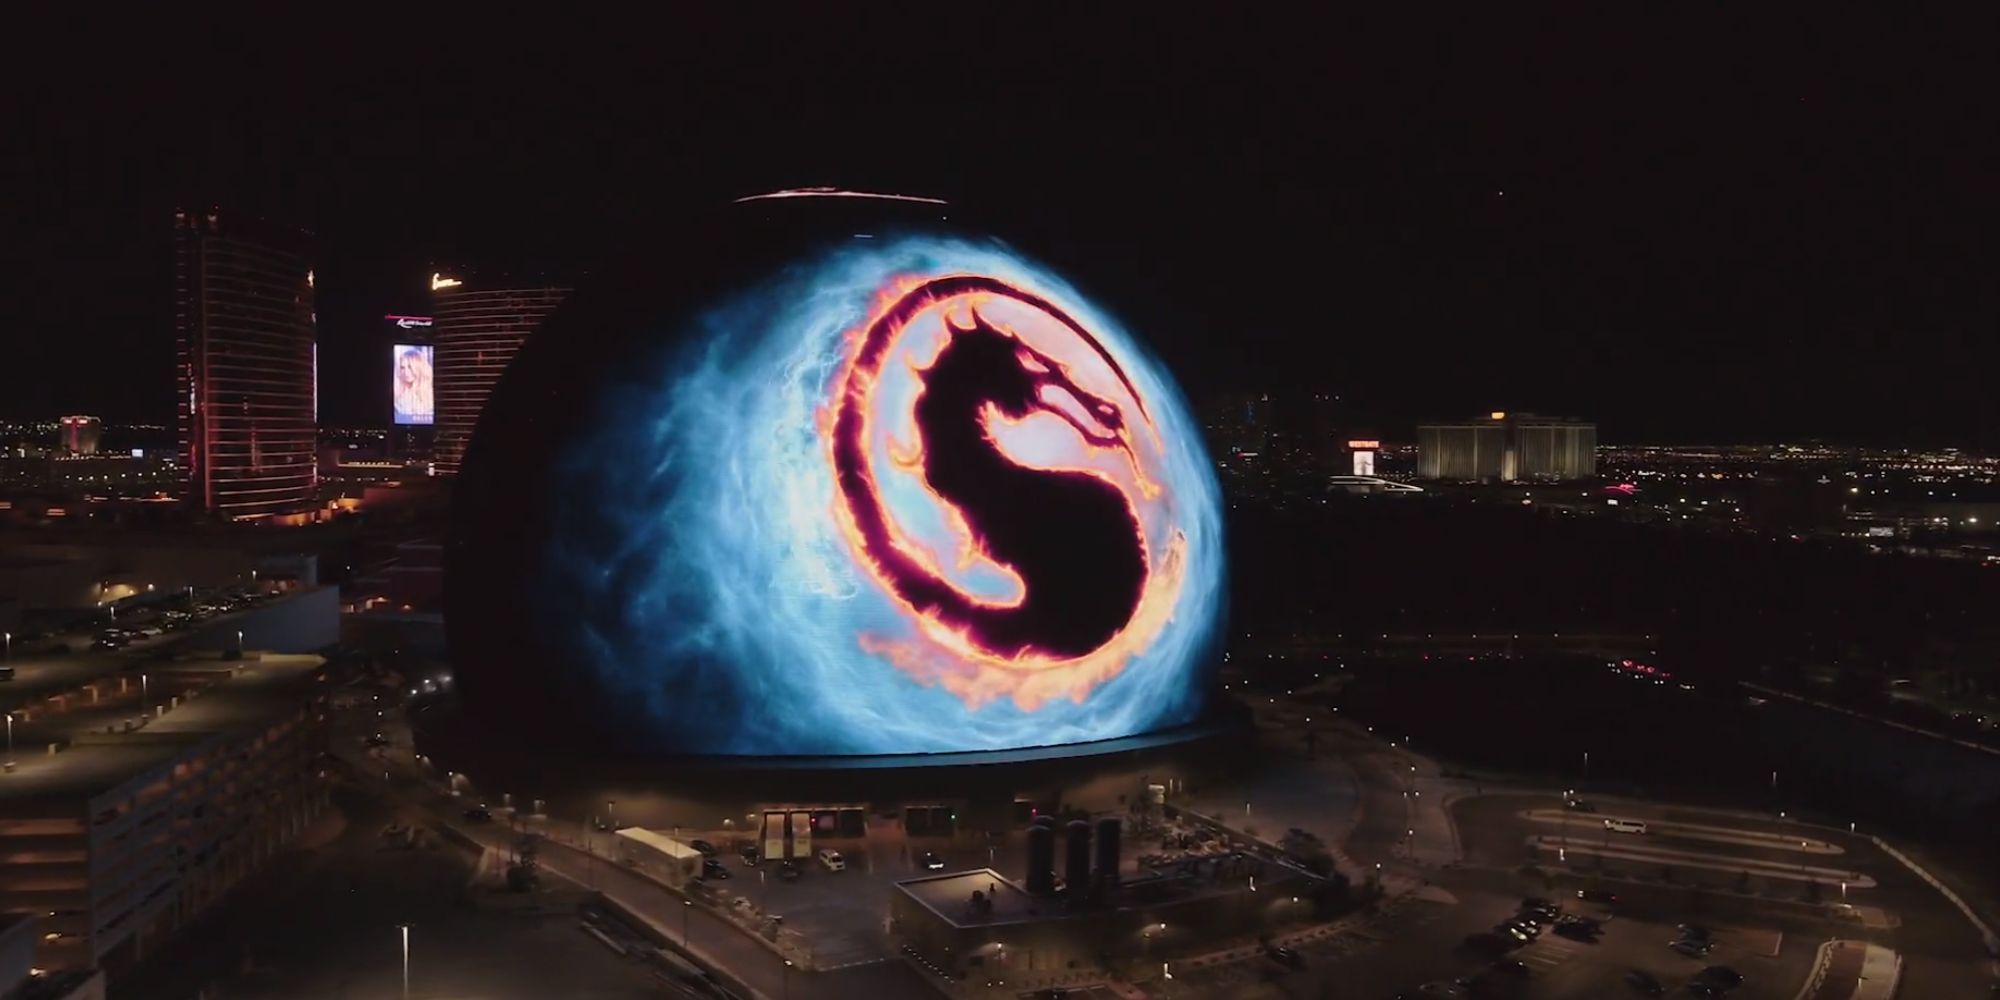 An advert for Mortal Kombat 1 on the MSG Sphere stadium. The stadium is a huge sphere that can display massive adverts. The advert shows the Mortal Kombat logo off to the city. 